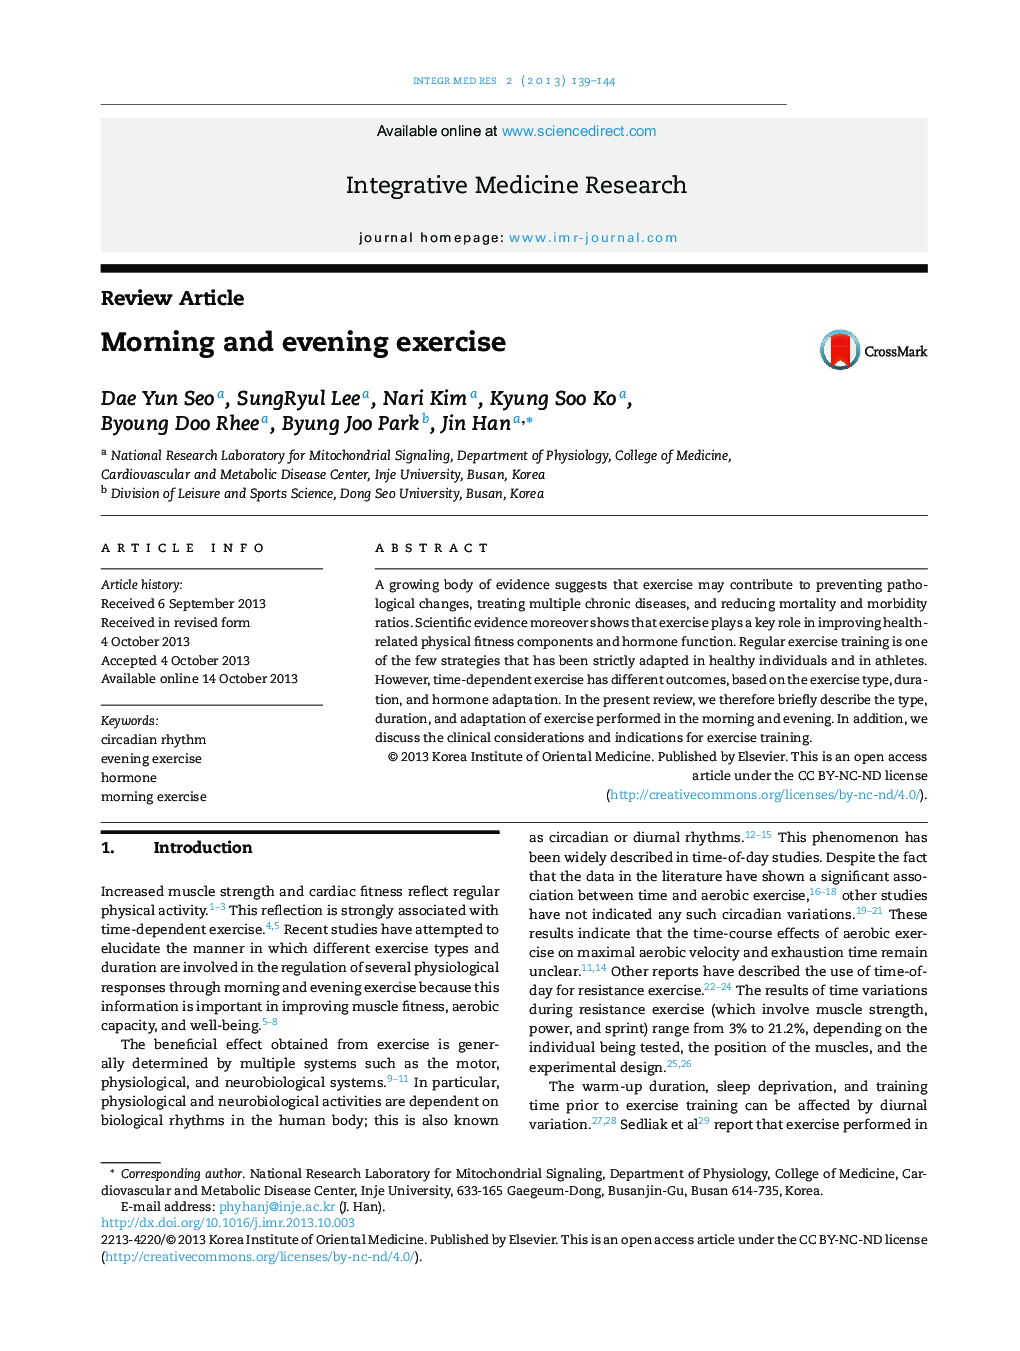 Morning and evening exercise